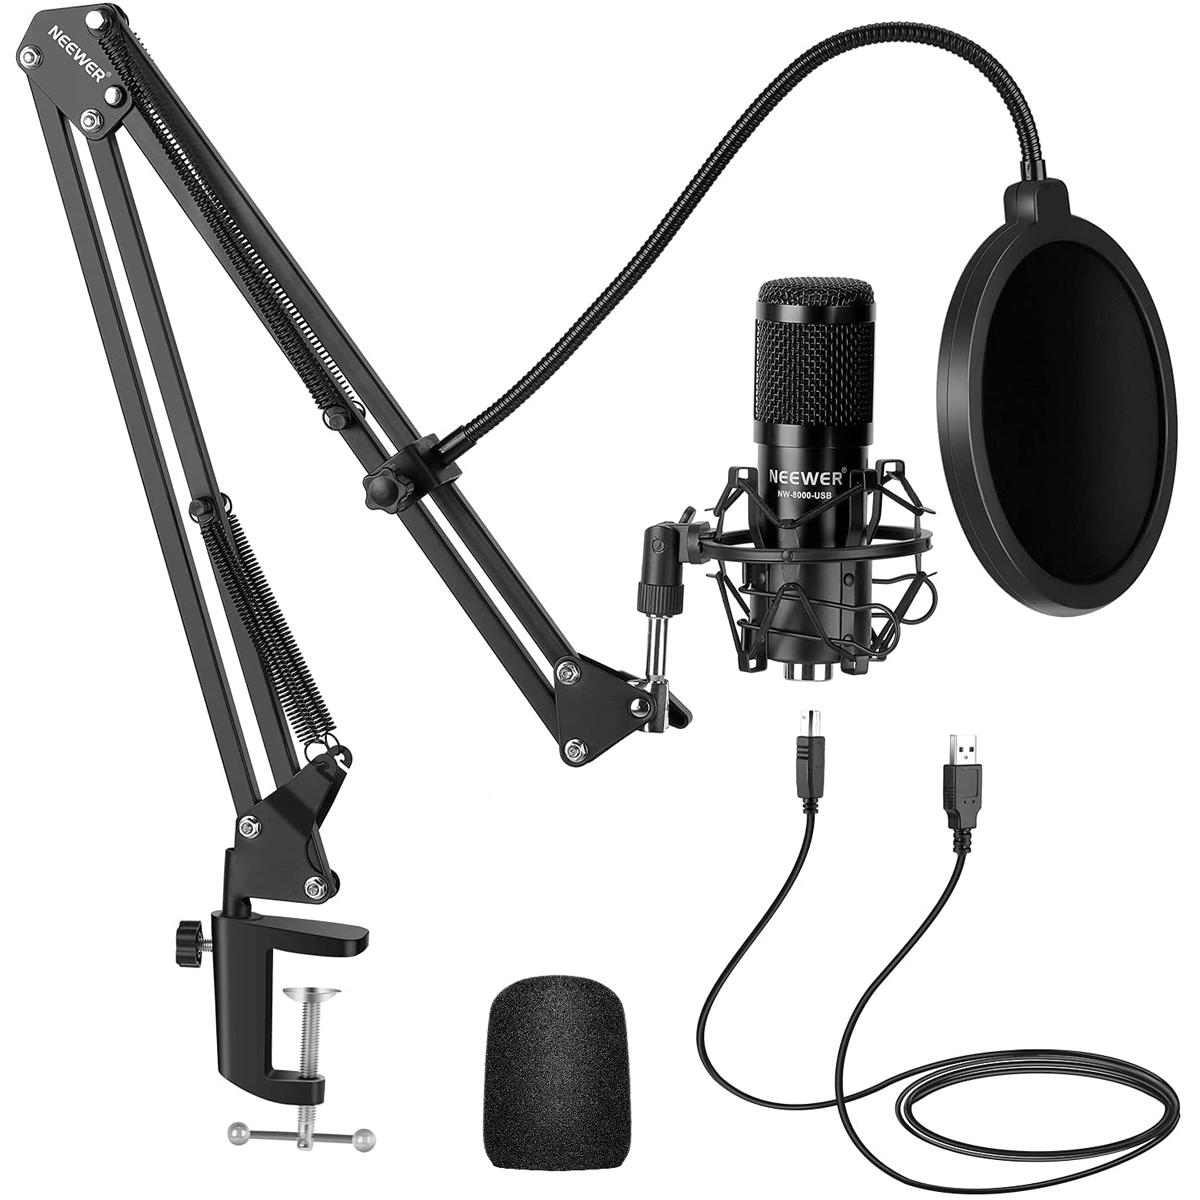 Neewer NW-8000 Condenser USB Microphone for $22 Shipped